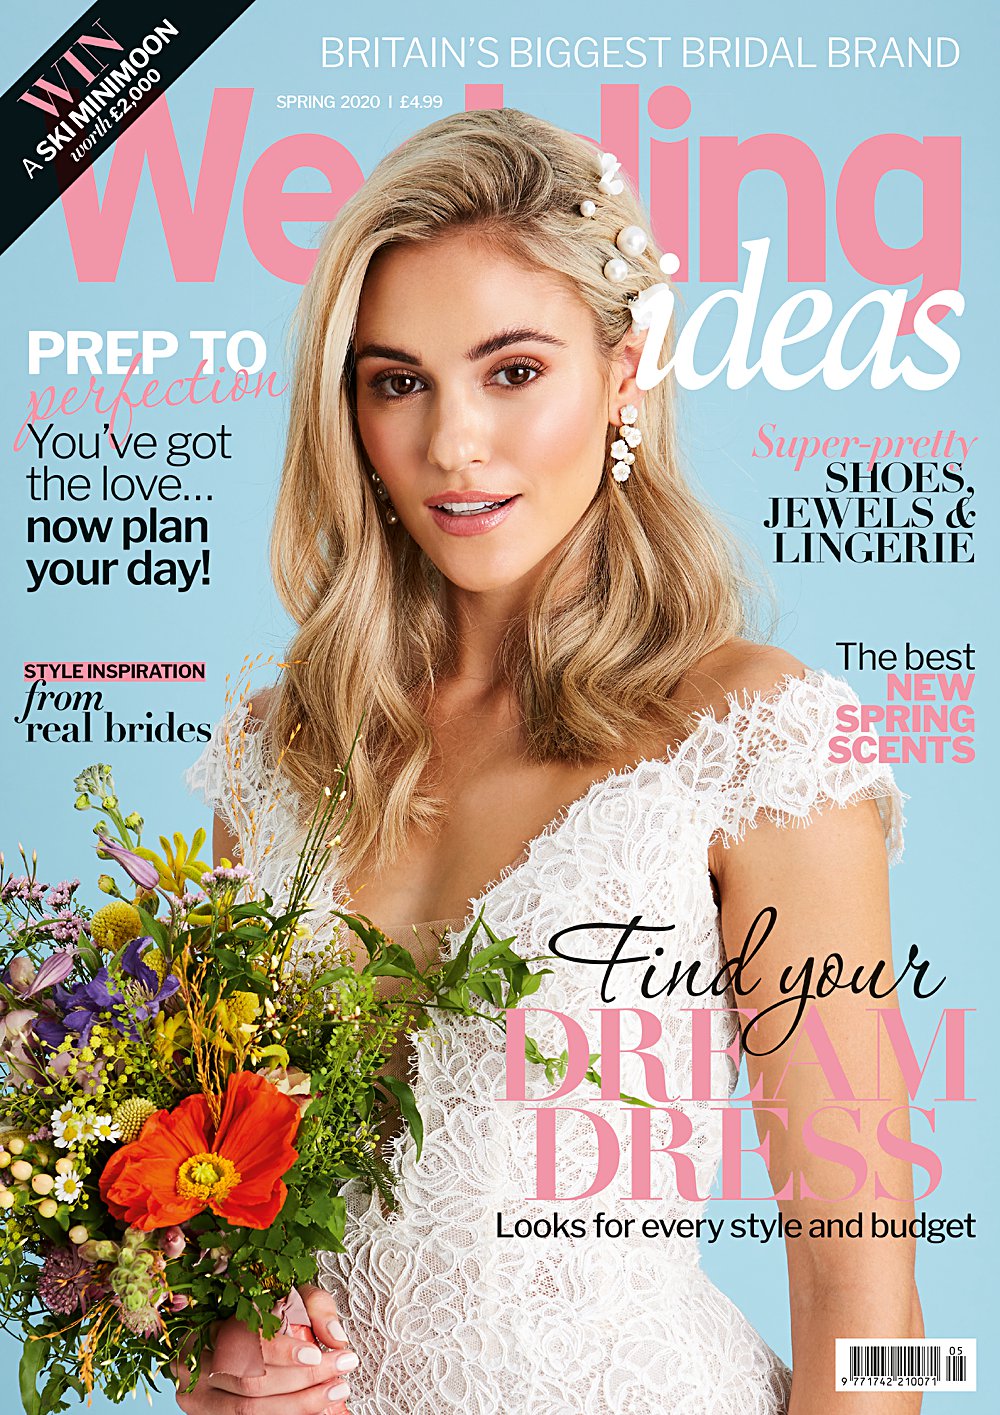 The May cover of Wedding Ideas styled by Pierre Carr and features model Meg Makin